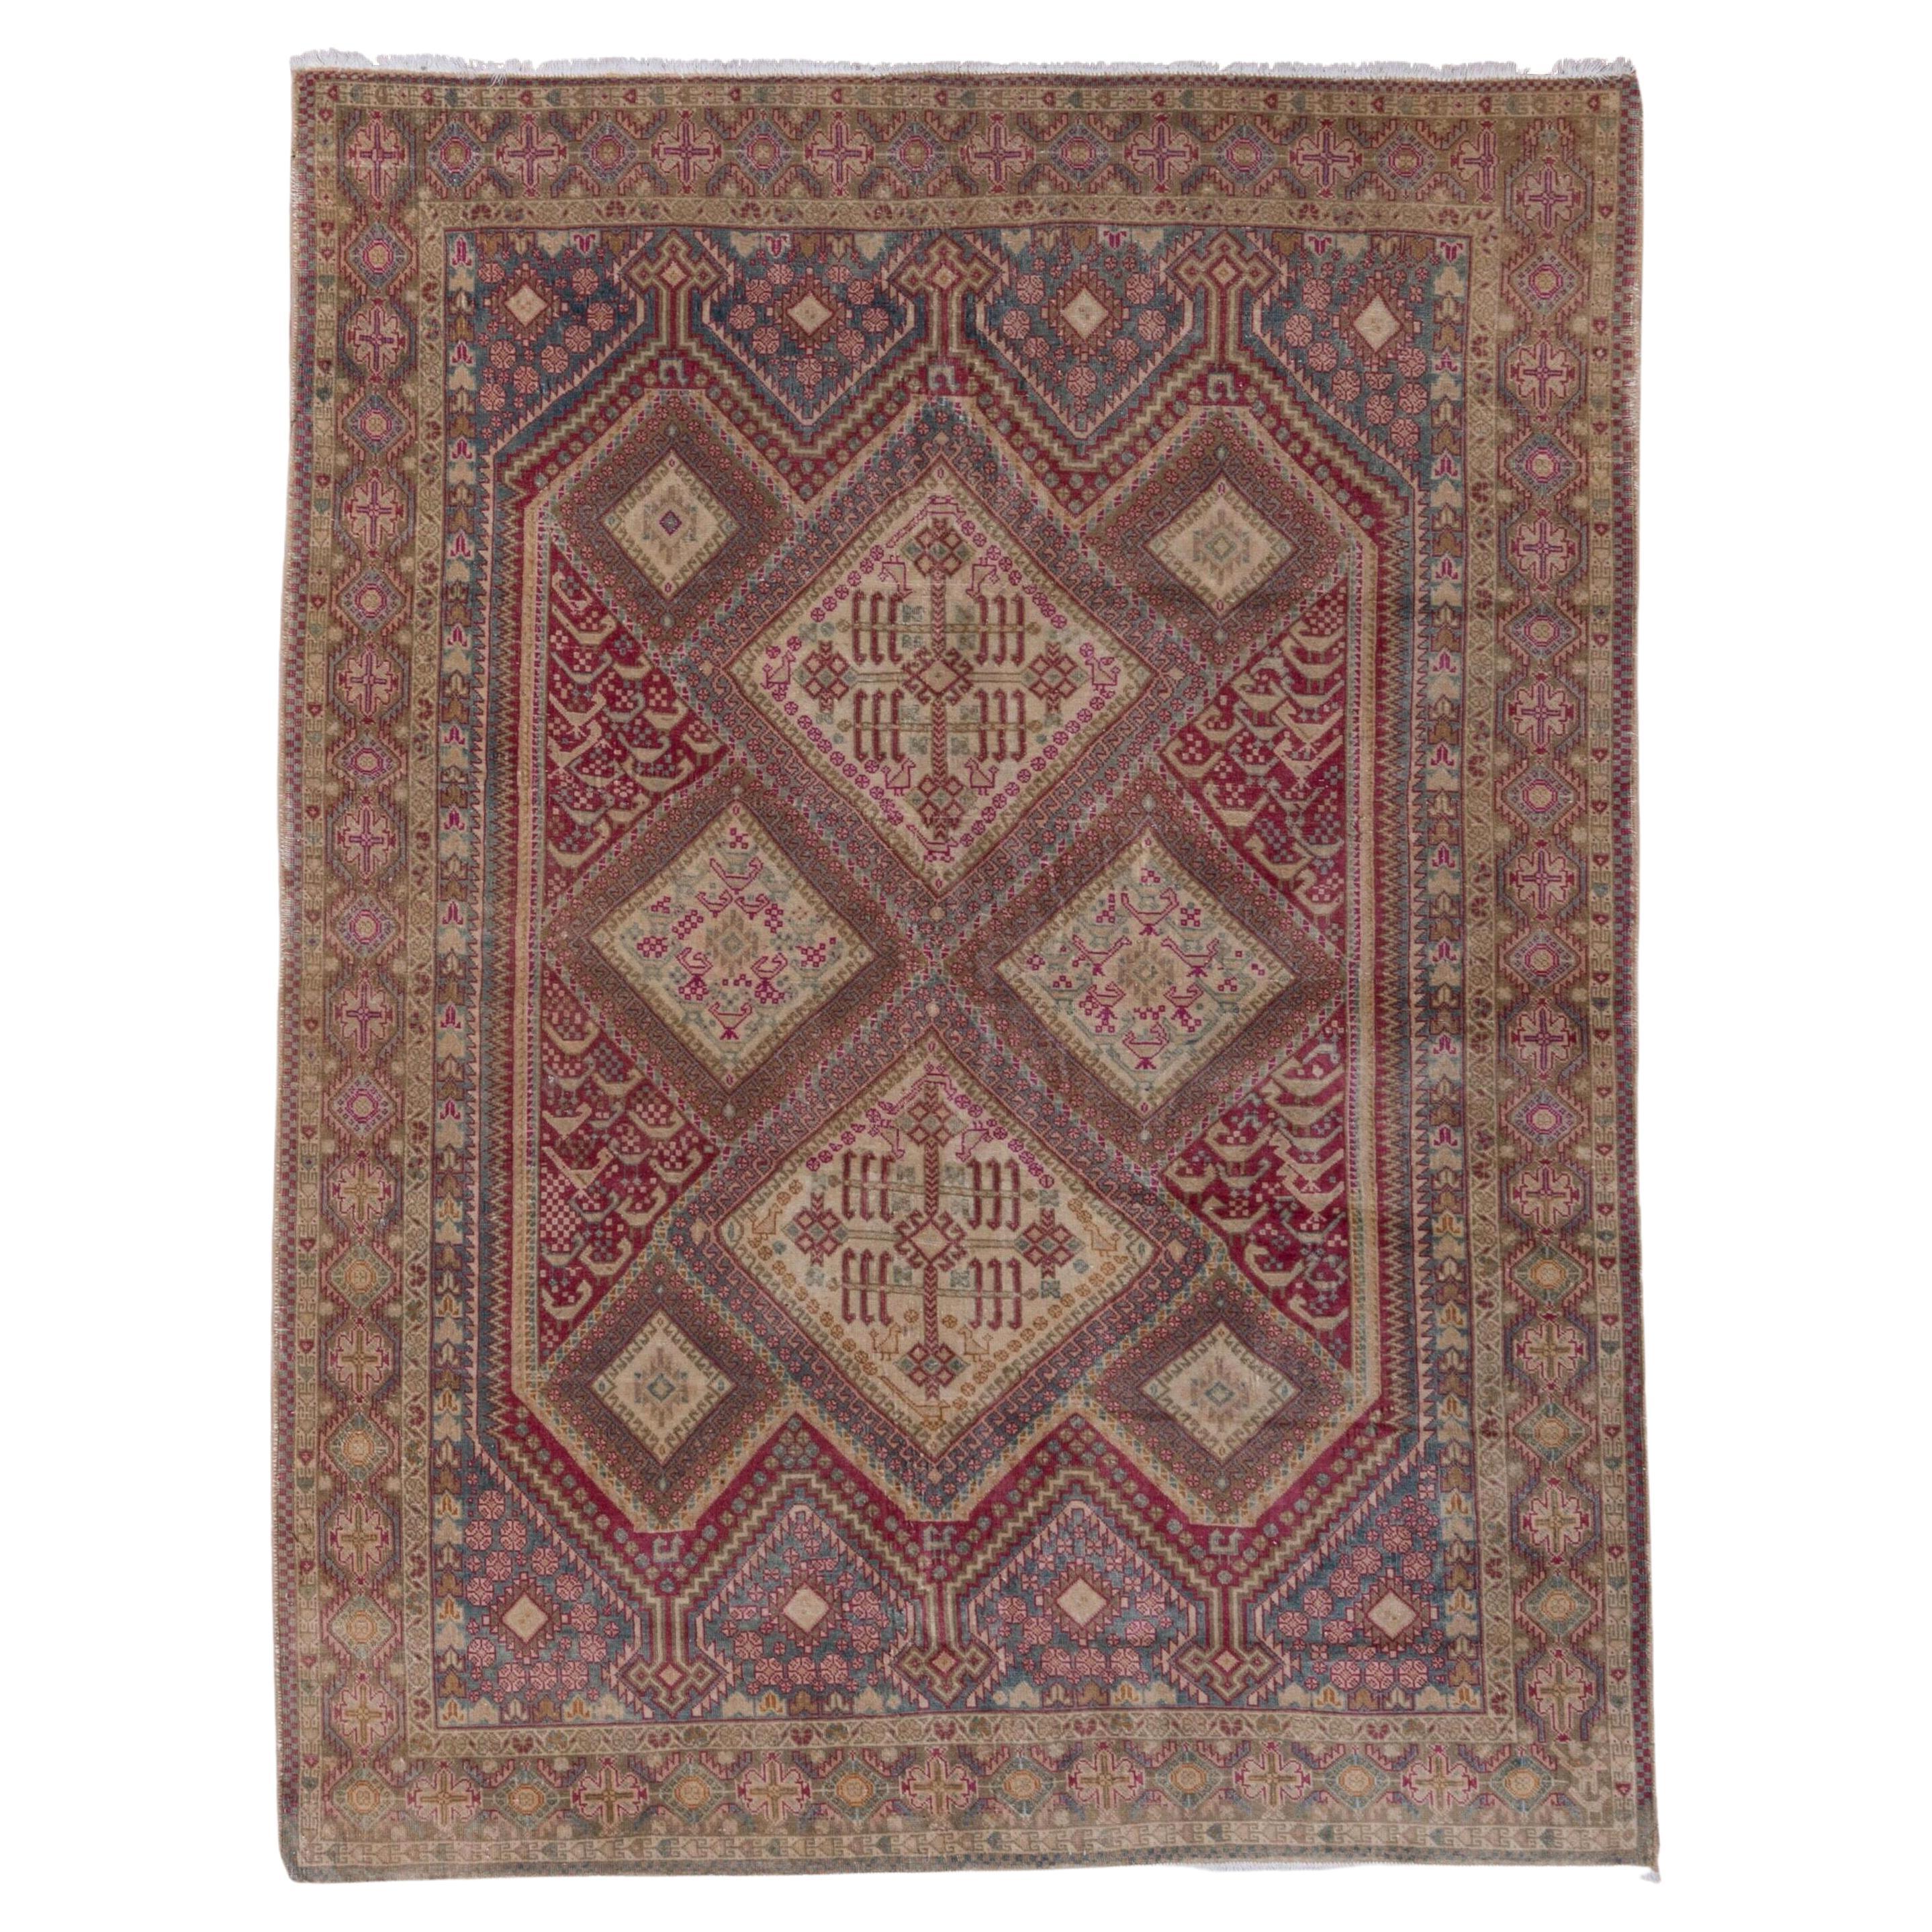 Antique Tribal Persian Afshar Rug, Colorful Palette, Pink Blue and Green Tones